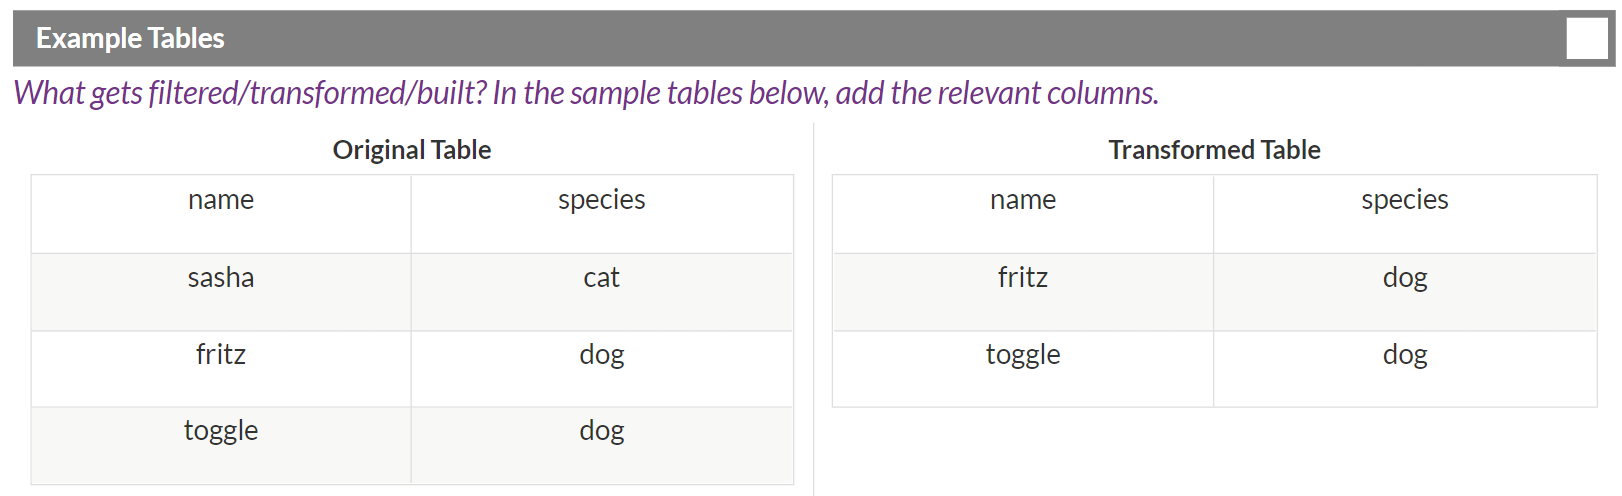 filled in example tables from Design Recipe worksheet